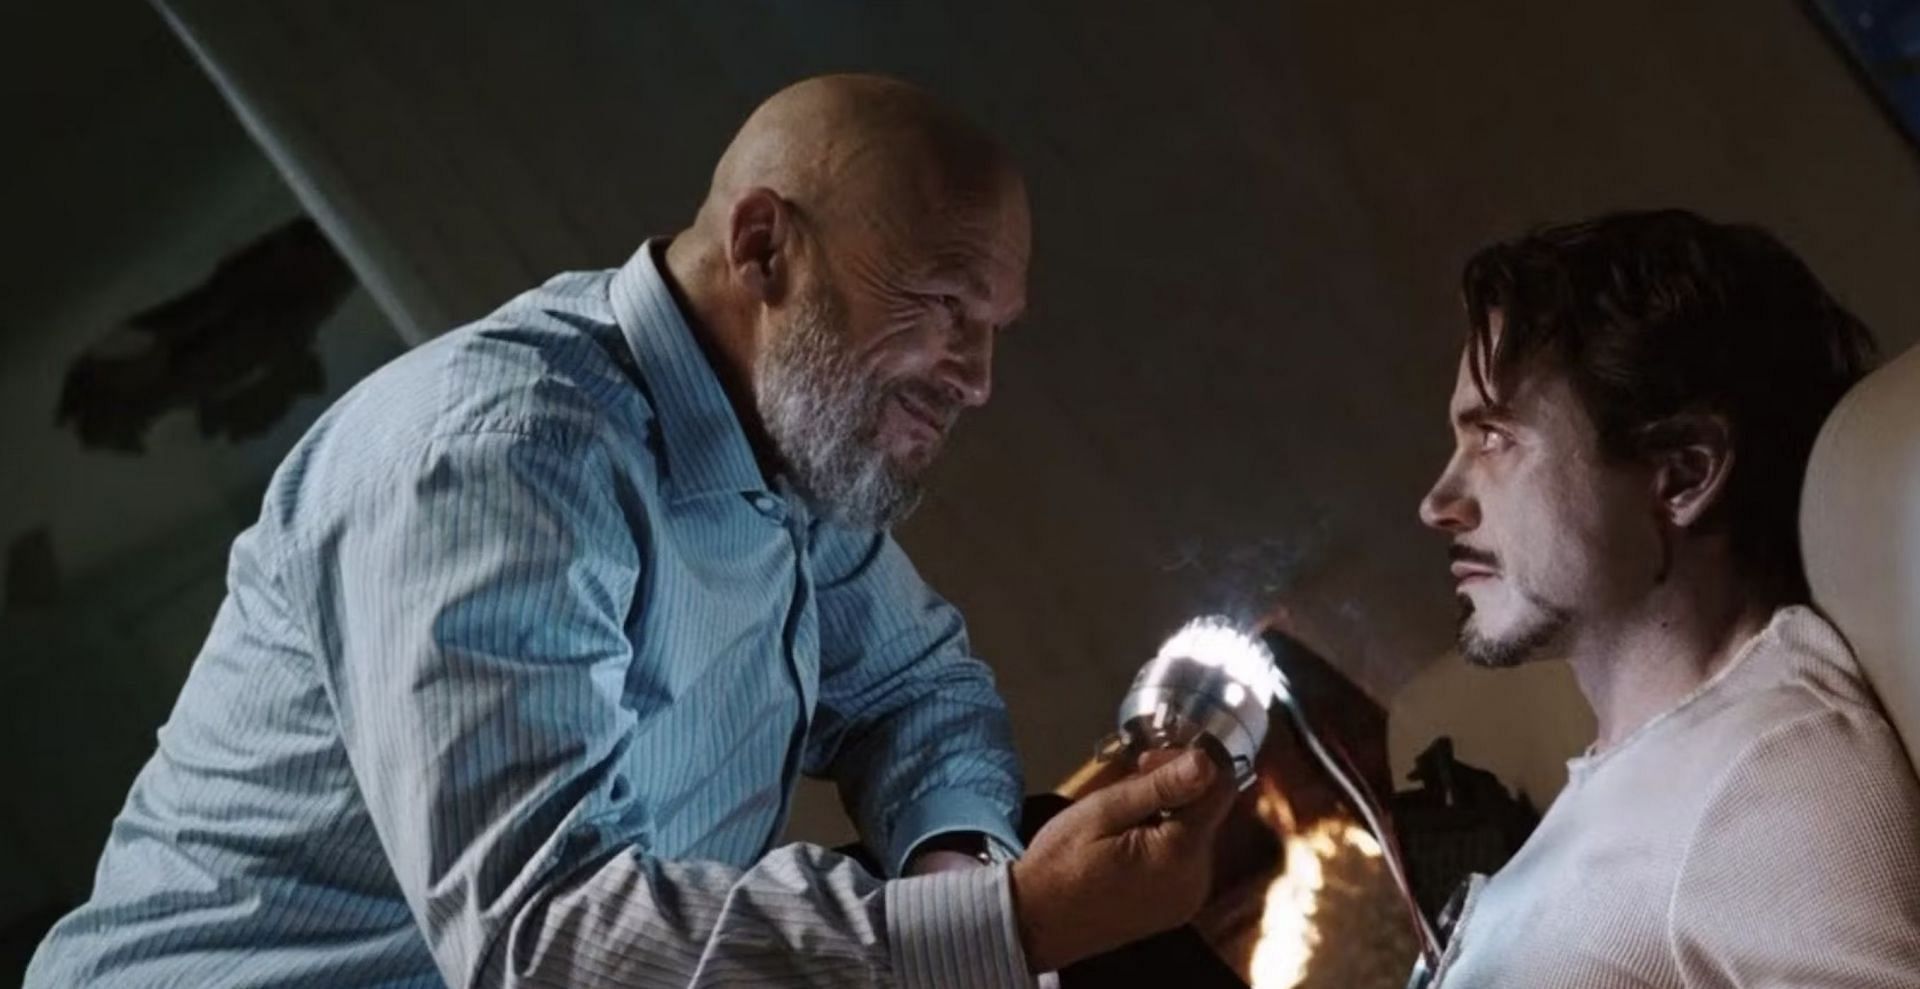 From Obadiah Stane to the Mandarin, villains in the franchise provide a real challenge for Tony Stark (Image via Marvel Studios)